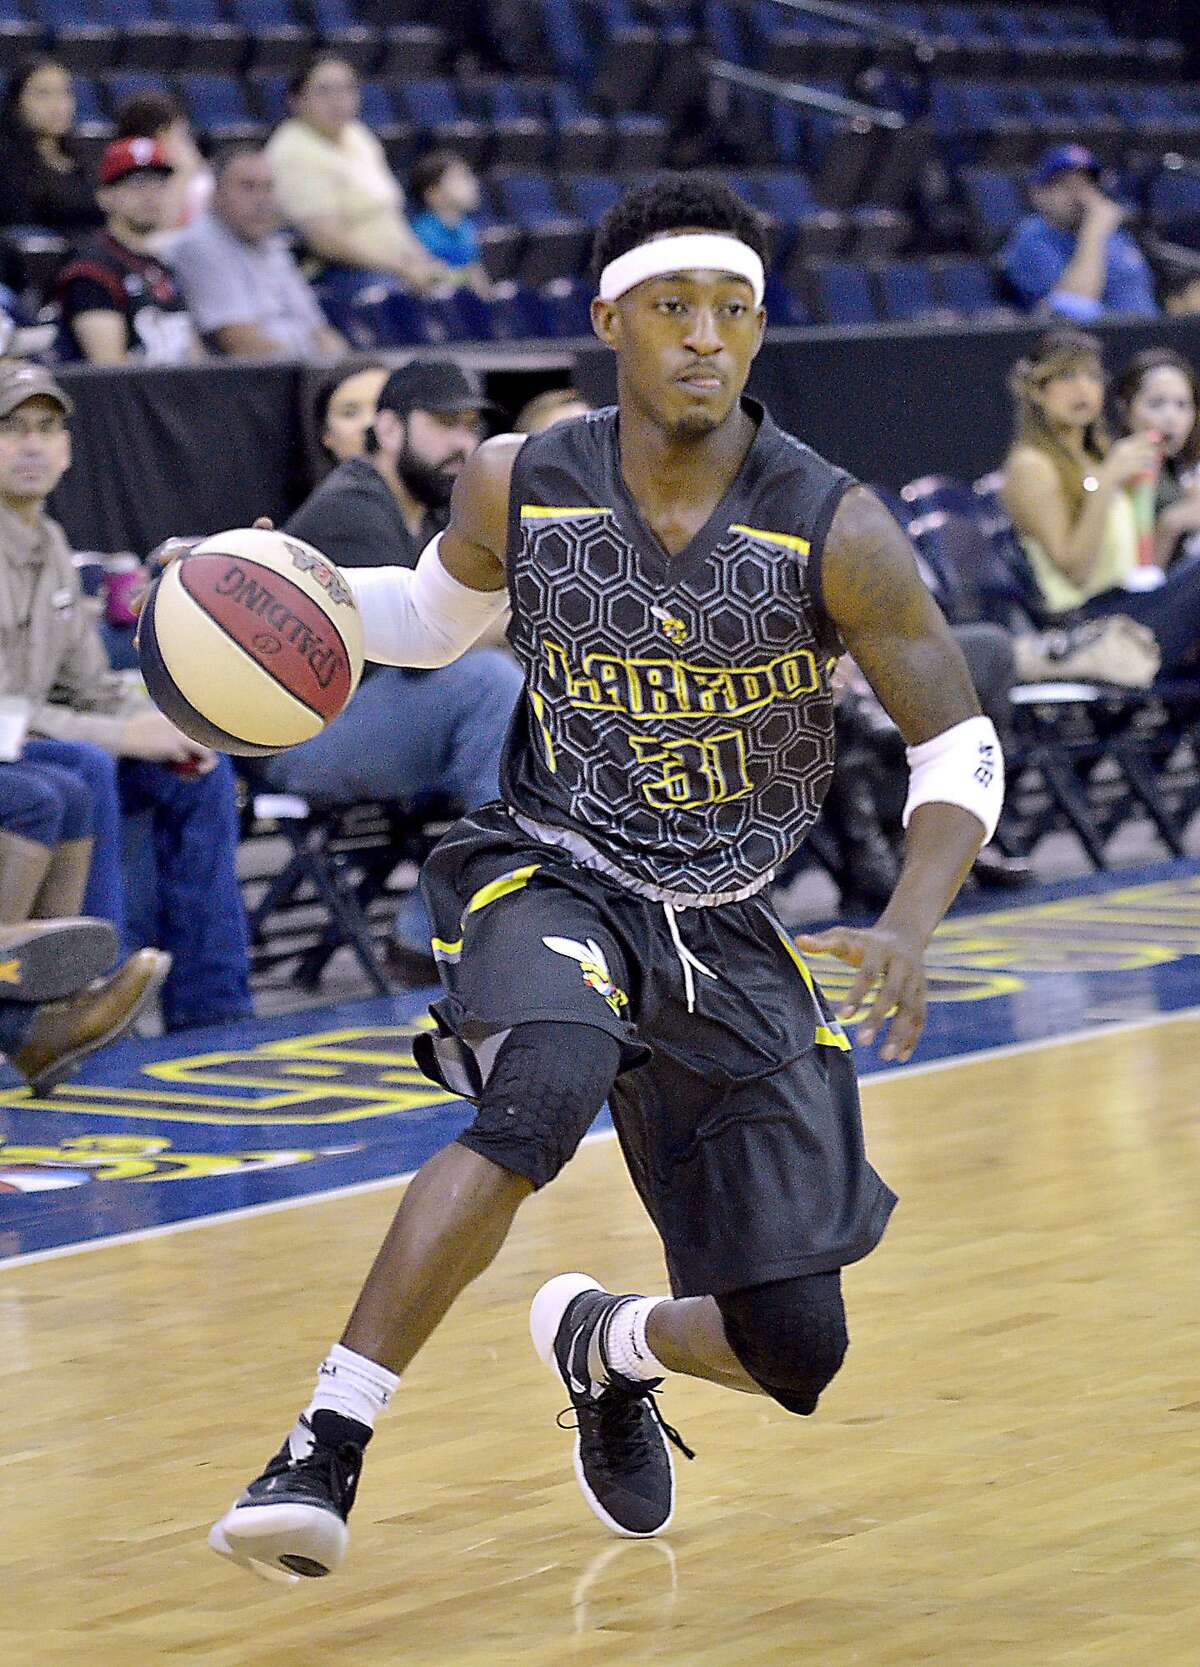 The Swarm have until the end of June to find a new owner or investor to run the team’s day-to-day operations after Laredo co-owner Marlon Minifee took a position with the American Basketball Association. Anthony Alston, pictured, and the Swarm finished as the No. 22-ranked team in the country last year.